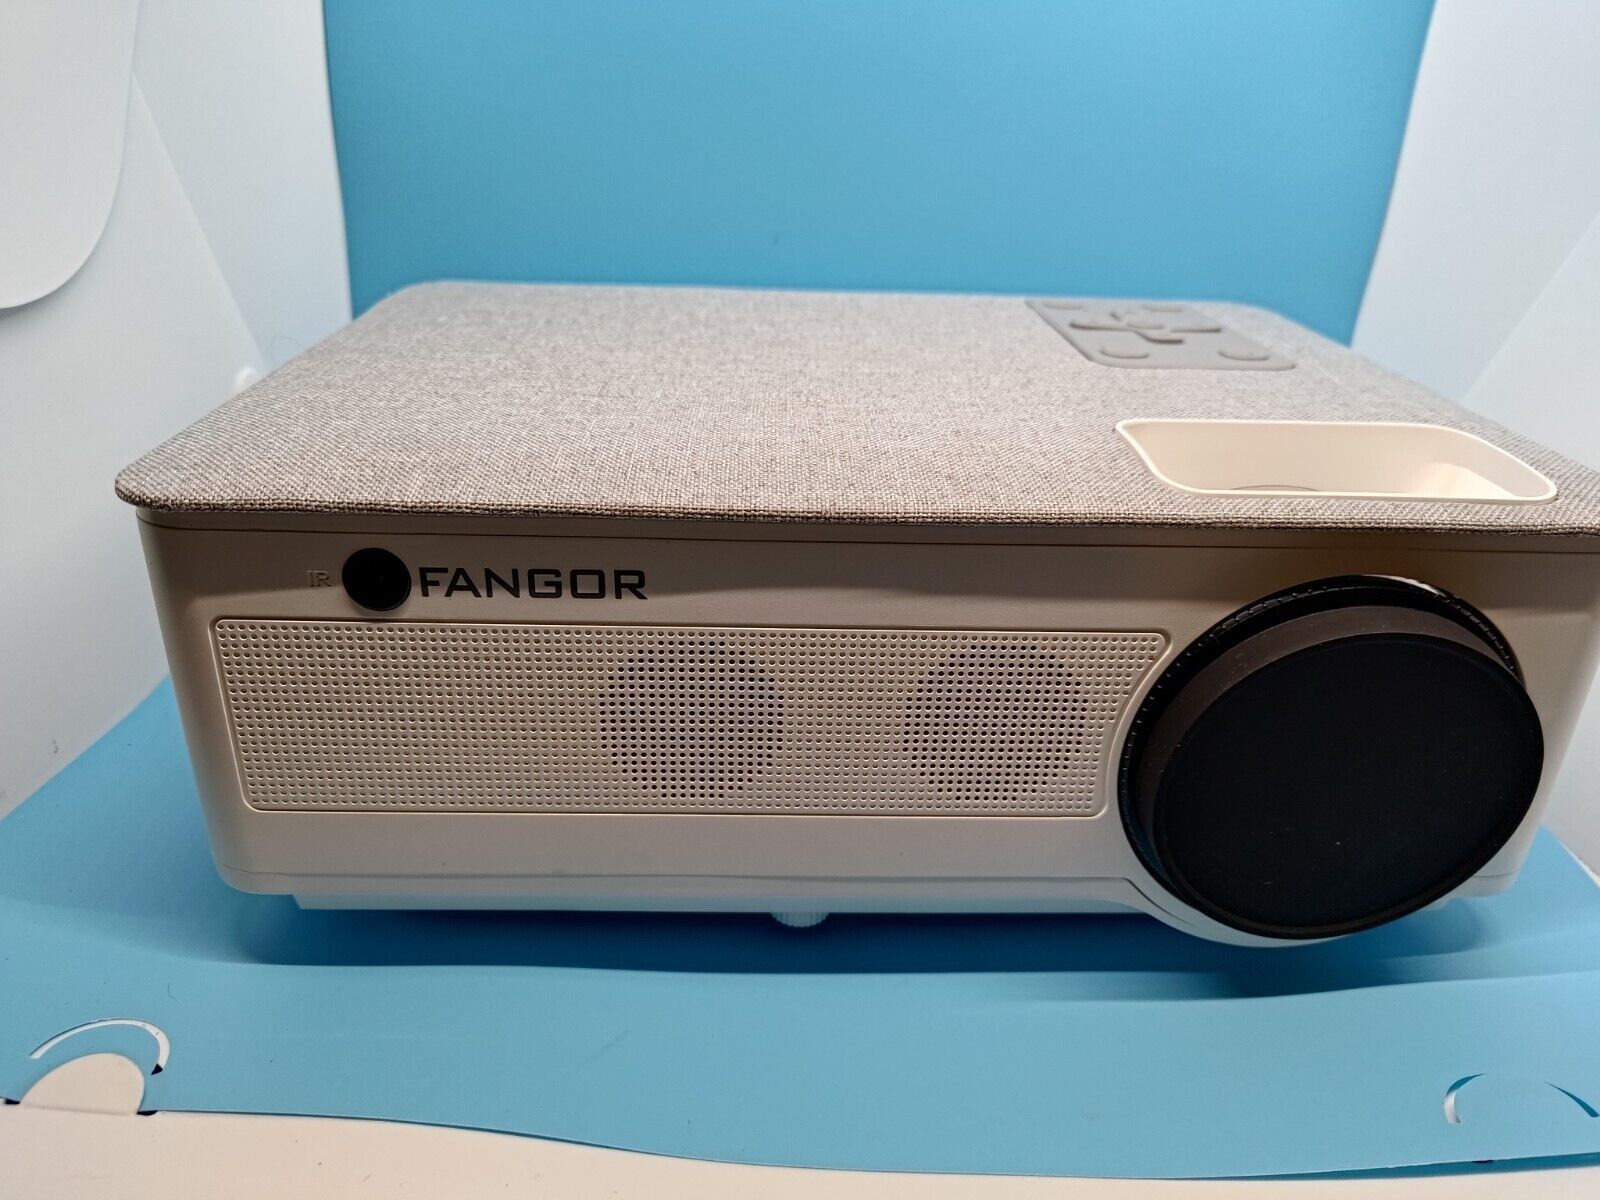 Connecting IPhone To Fangor Projector: Step-by-Step Guide